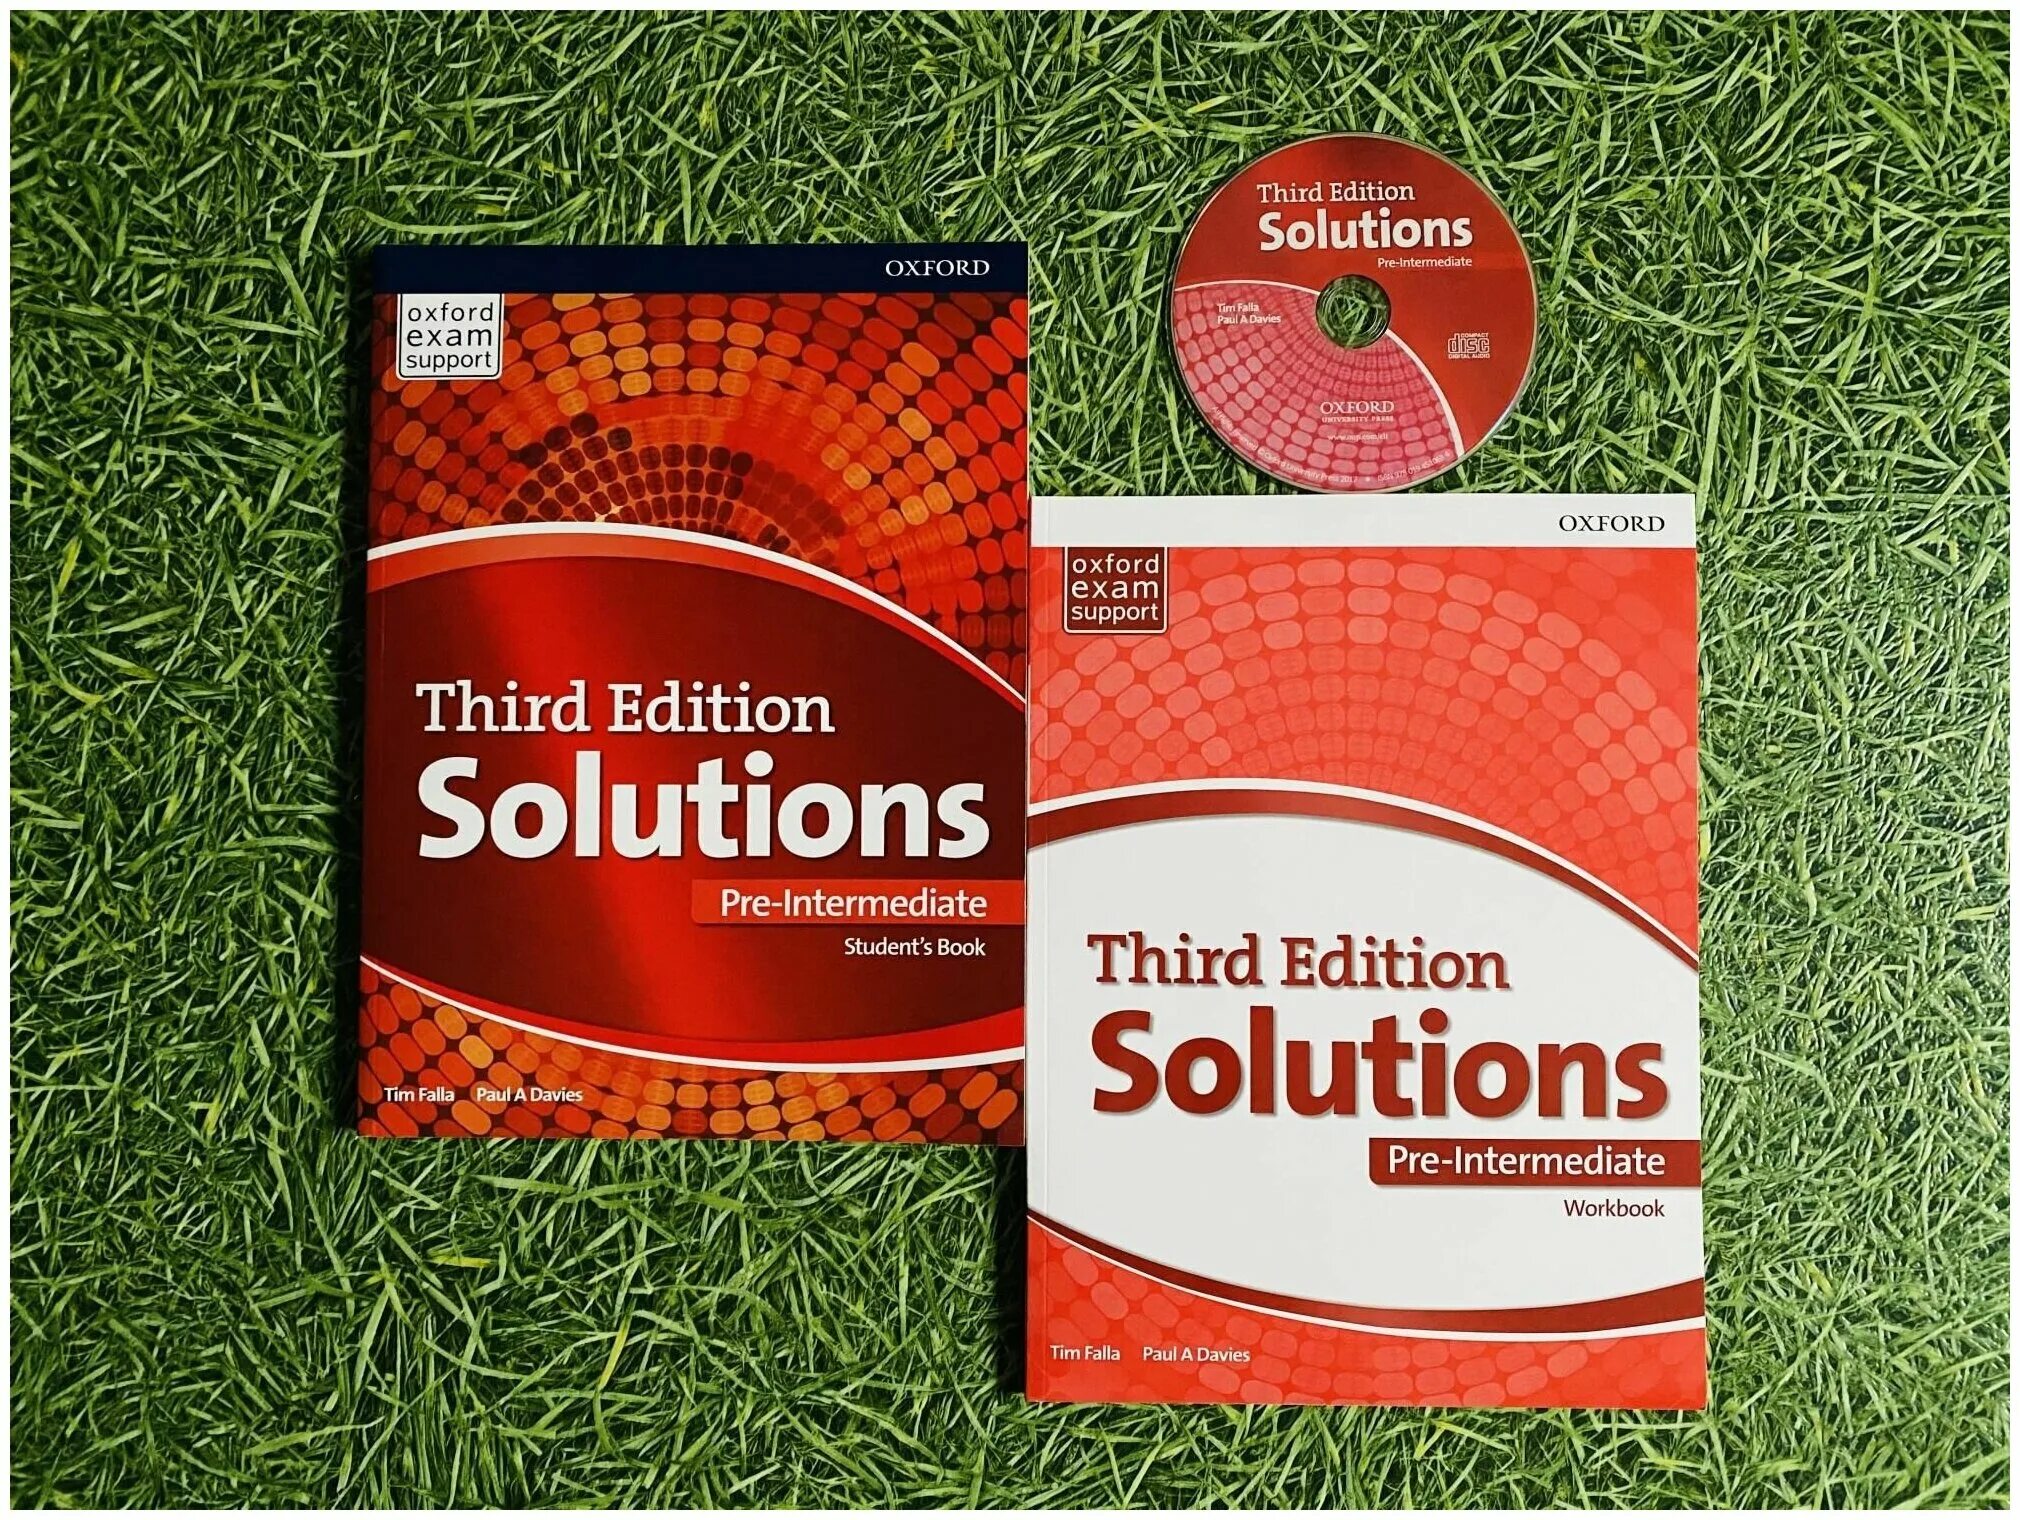 Solutions pre inter. Solutions: pre-Intermediate. Solutions учебник. Solutions pre-Intermediate 3rd. Third Edition solutions.